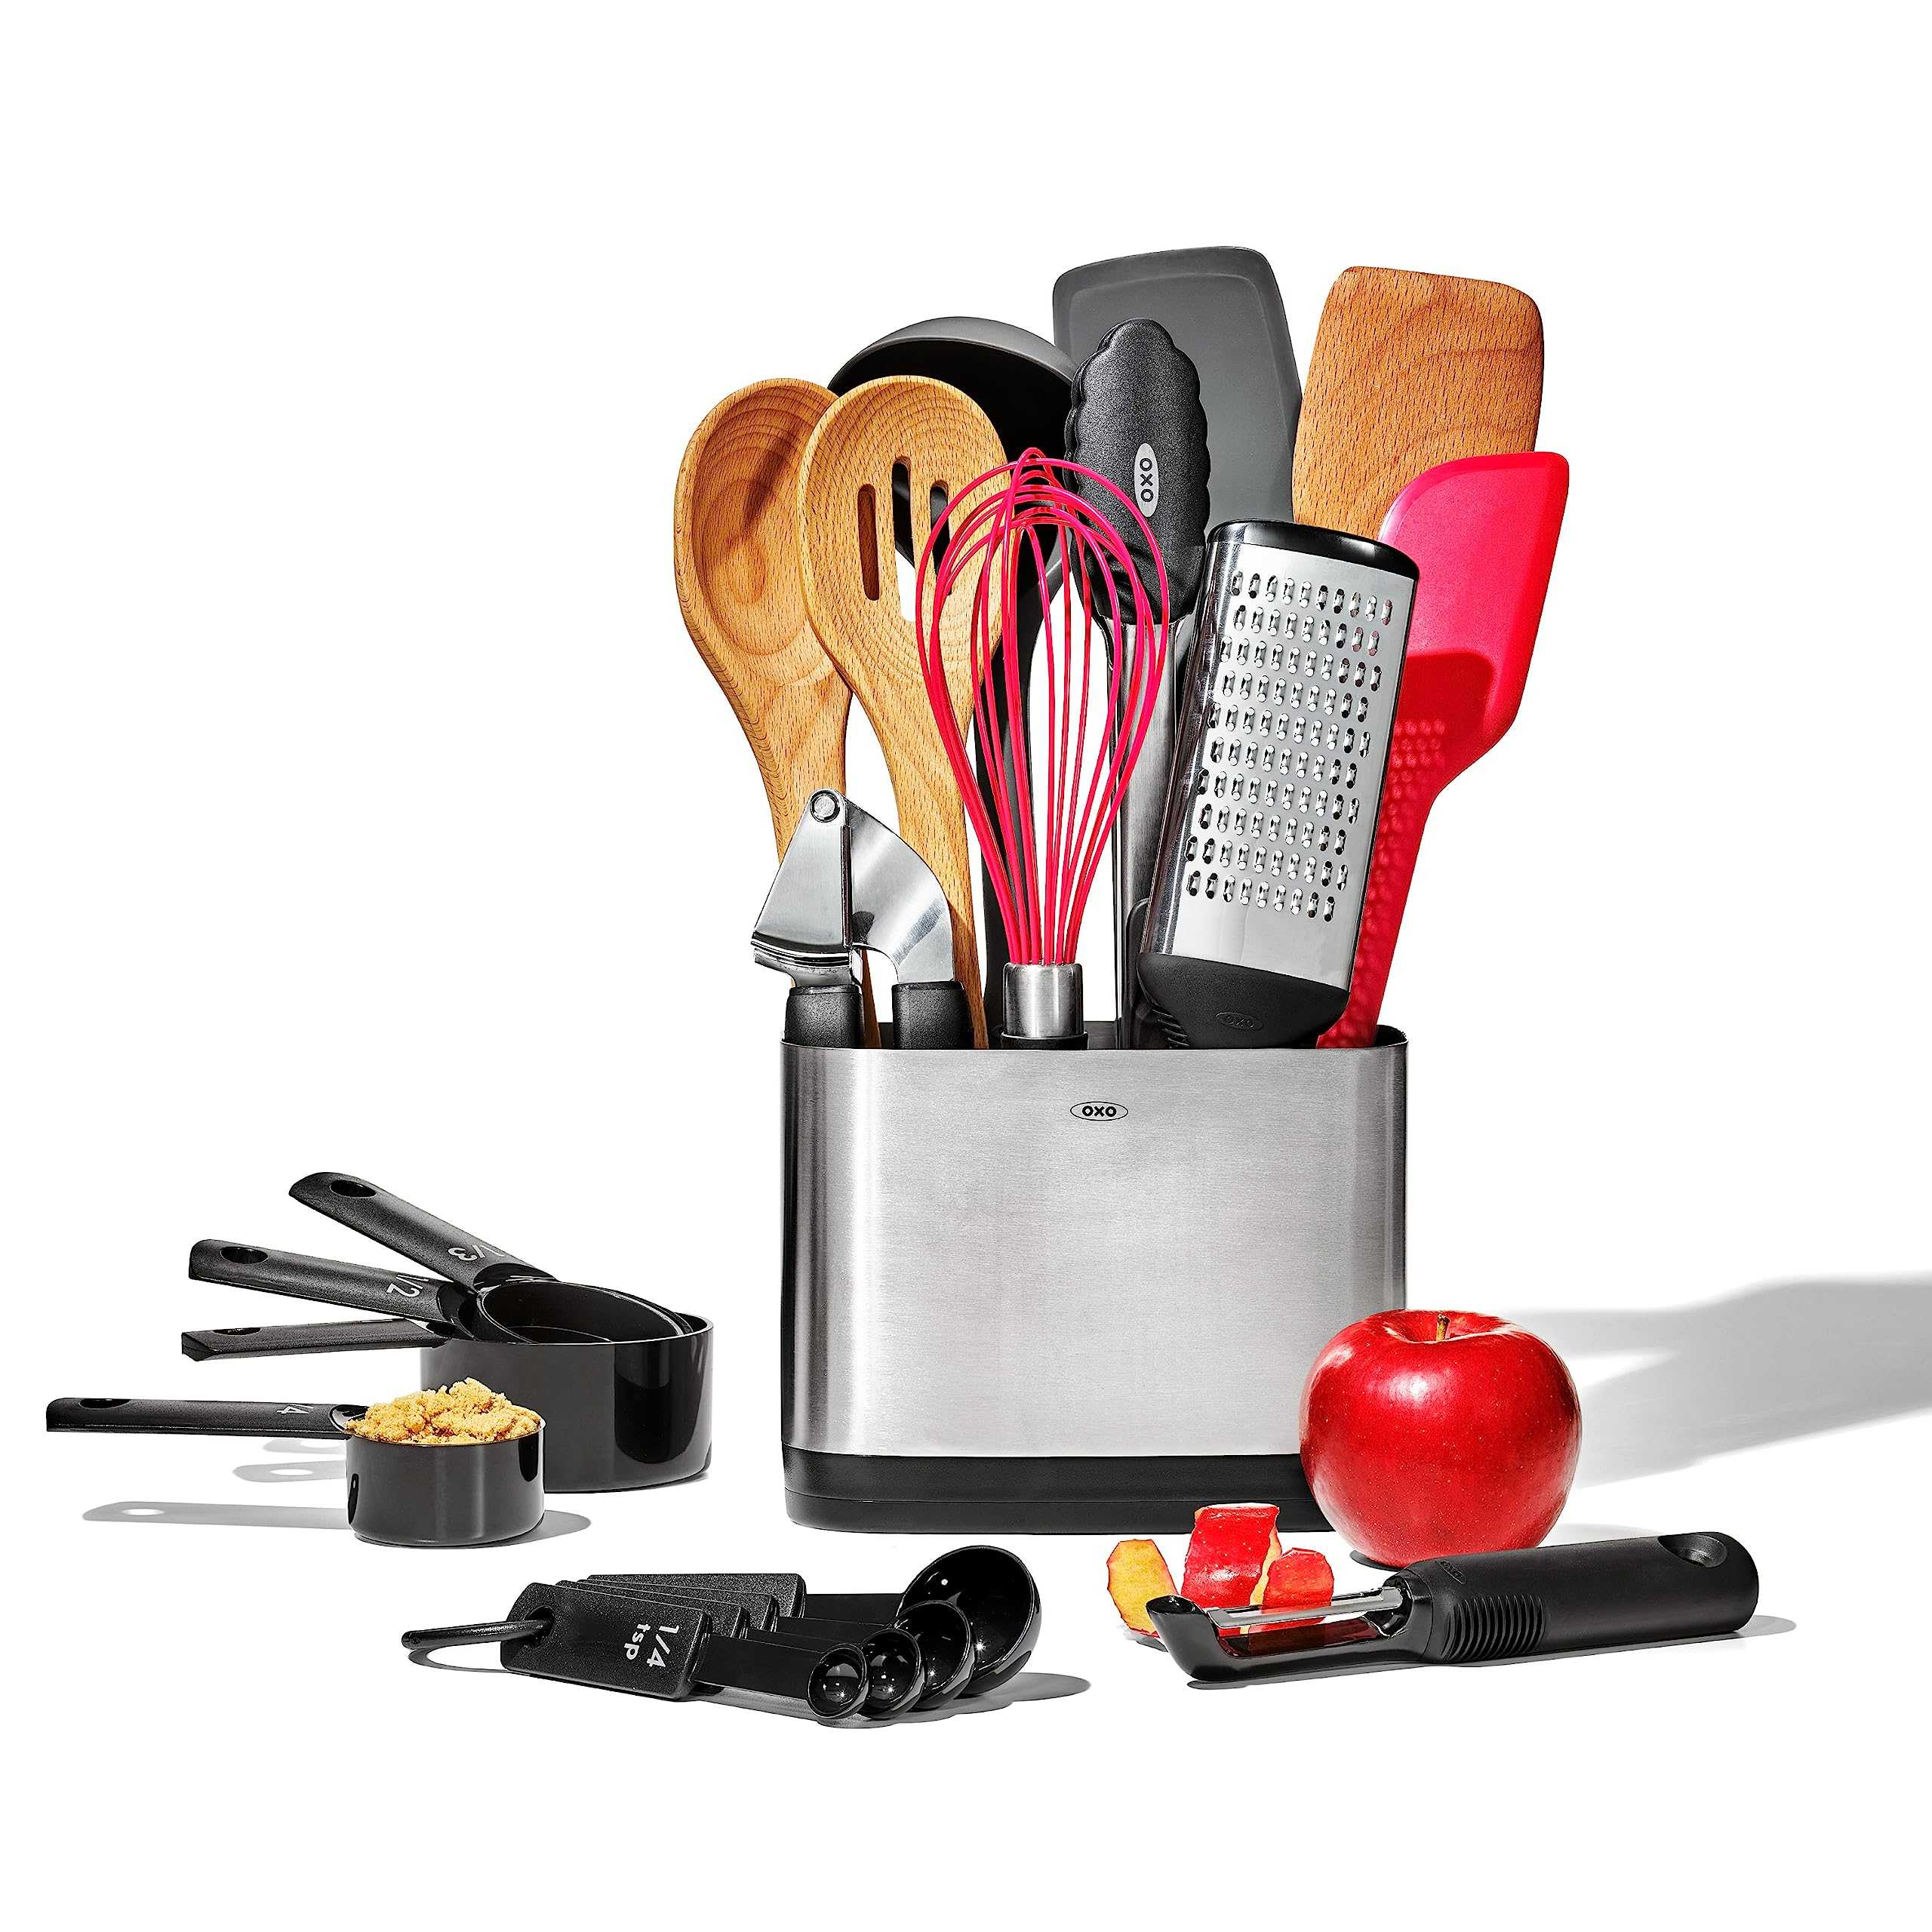 OXO Good Grips kitchen gadgets Christmas gifts on